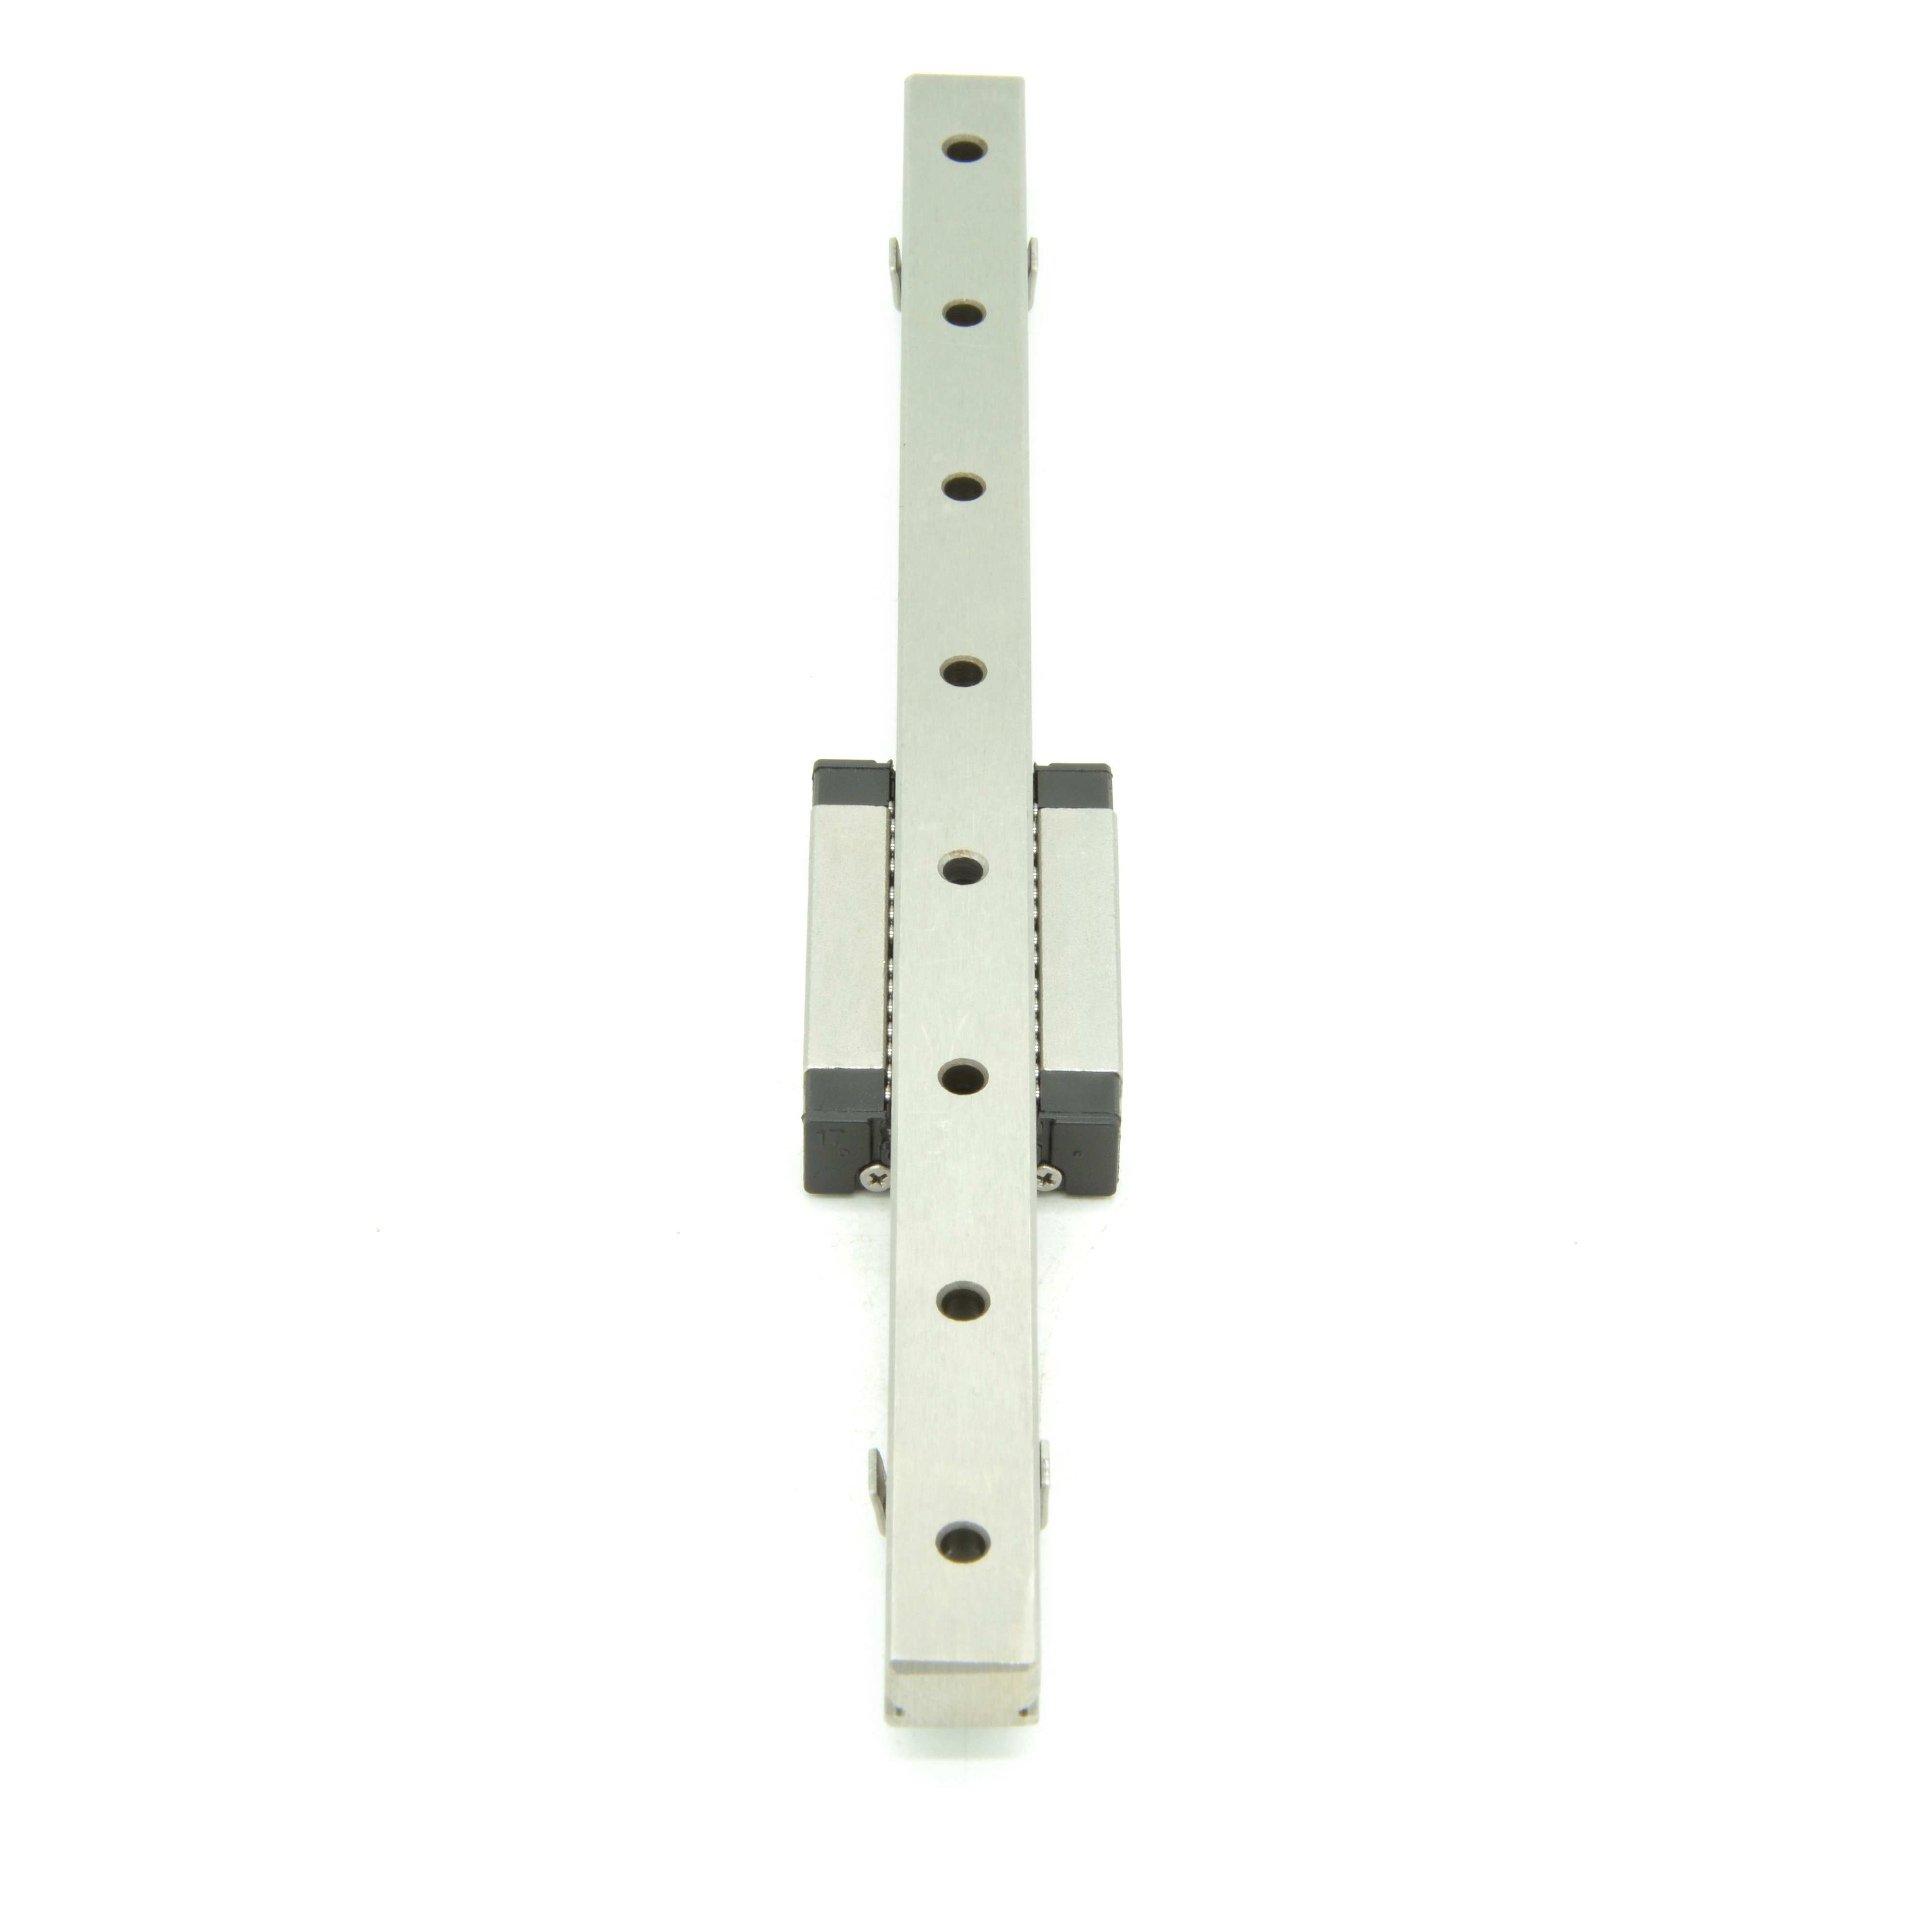 RobotDigg 440C SUS Stainless Steel MGN12 Linear Guide Rail Linear Guideway with C/H Carriages